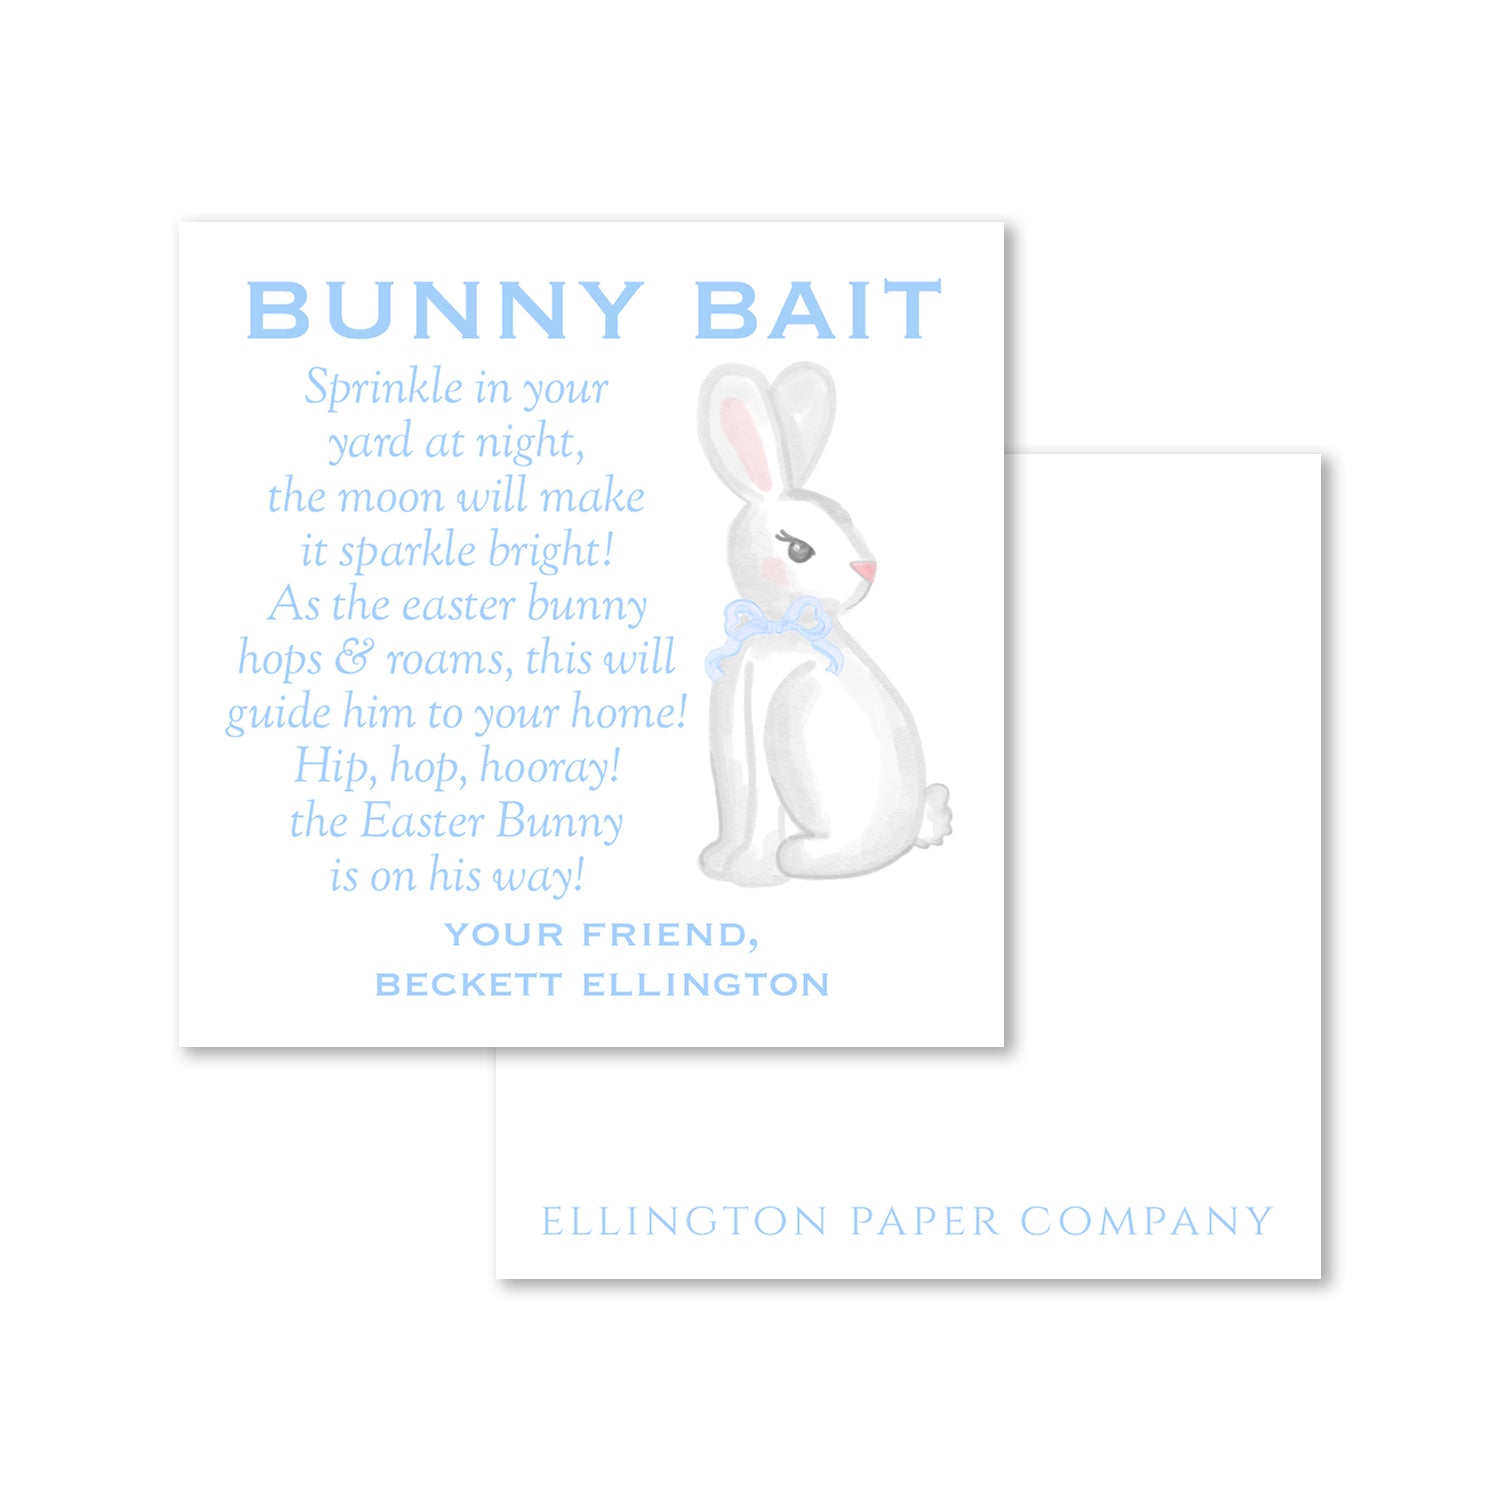 Bunny Bait Enclosure Cards and Stickers, Blue